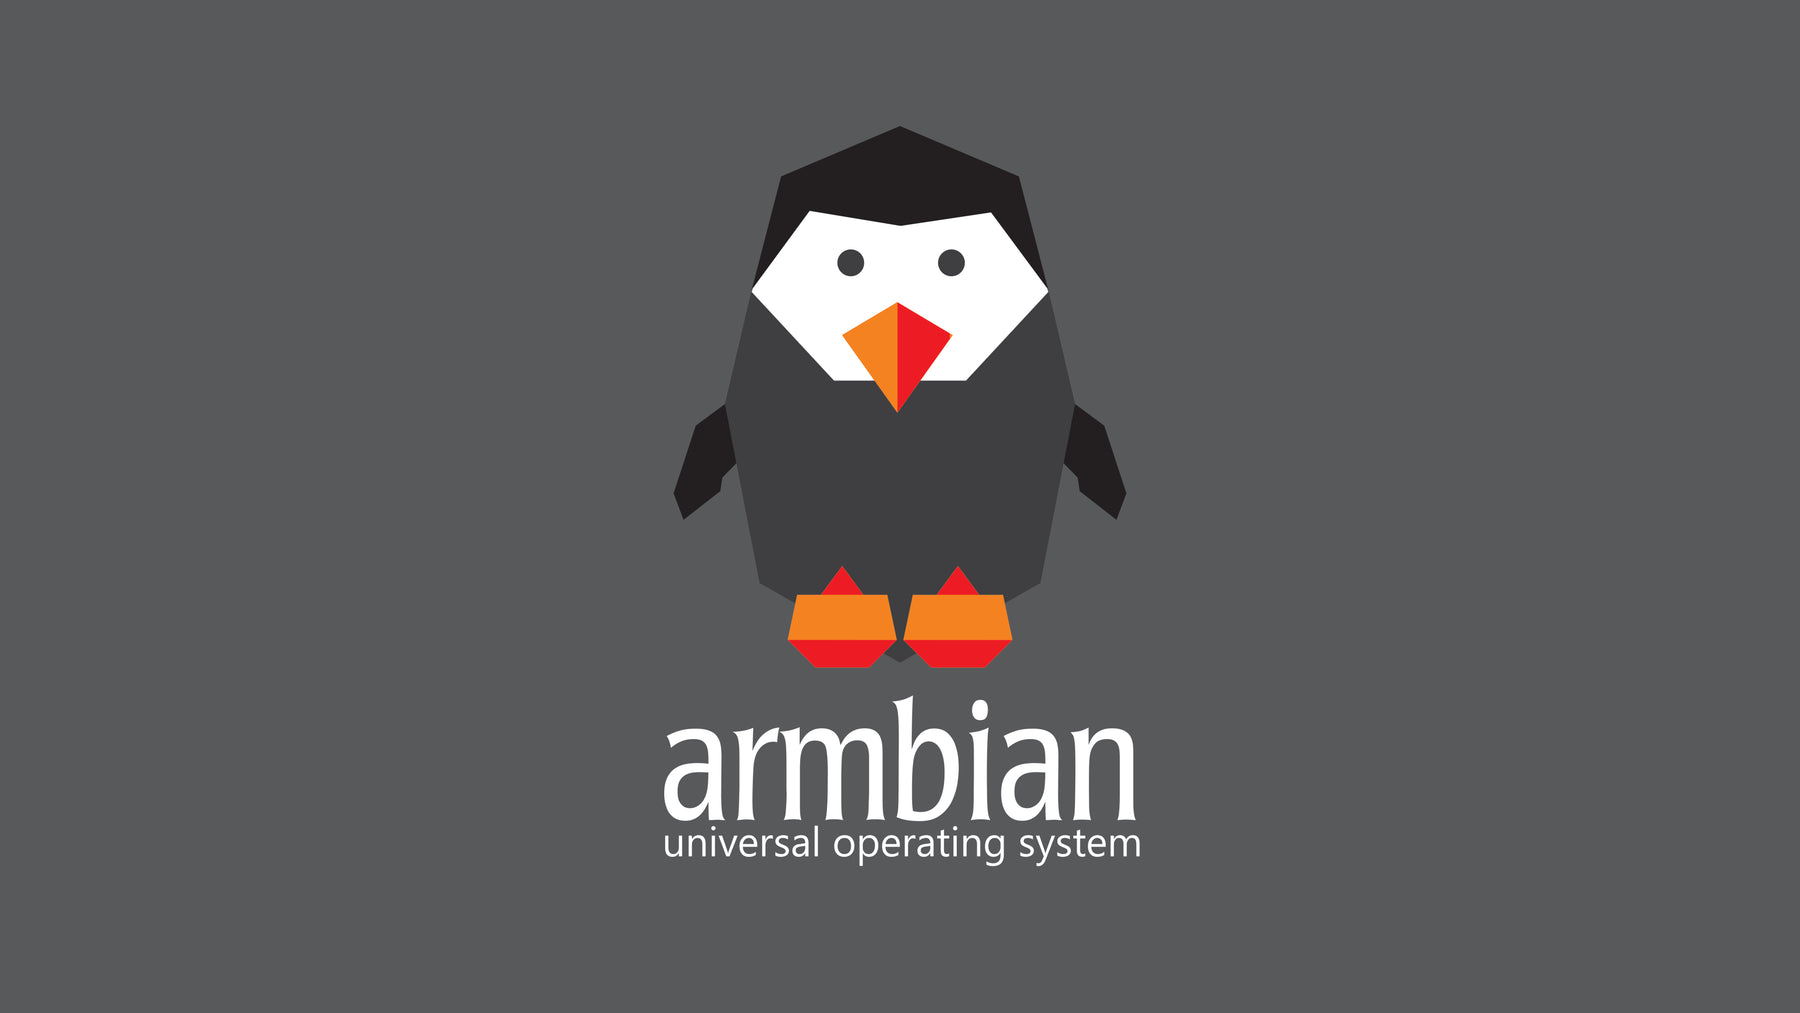 New version of armbian: Armbian 22.05